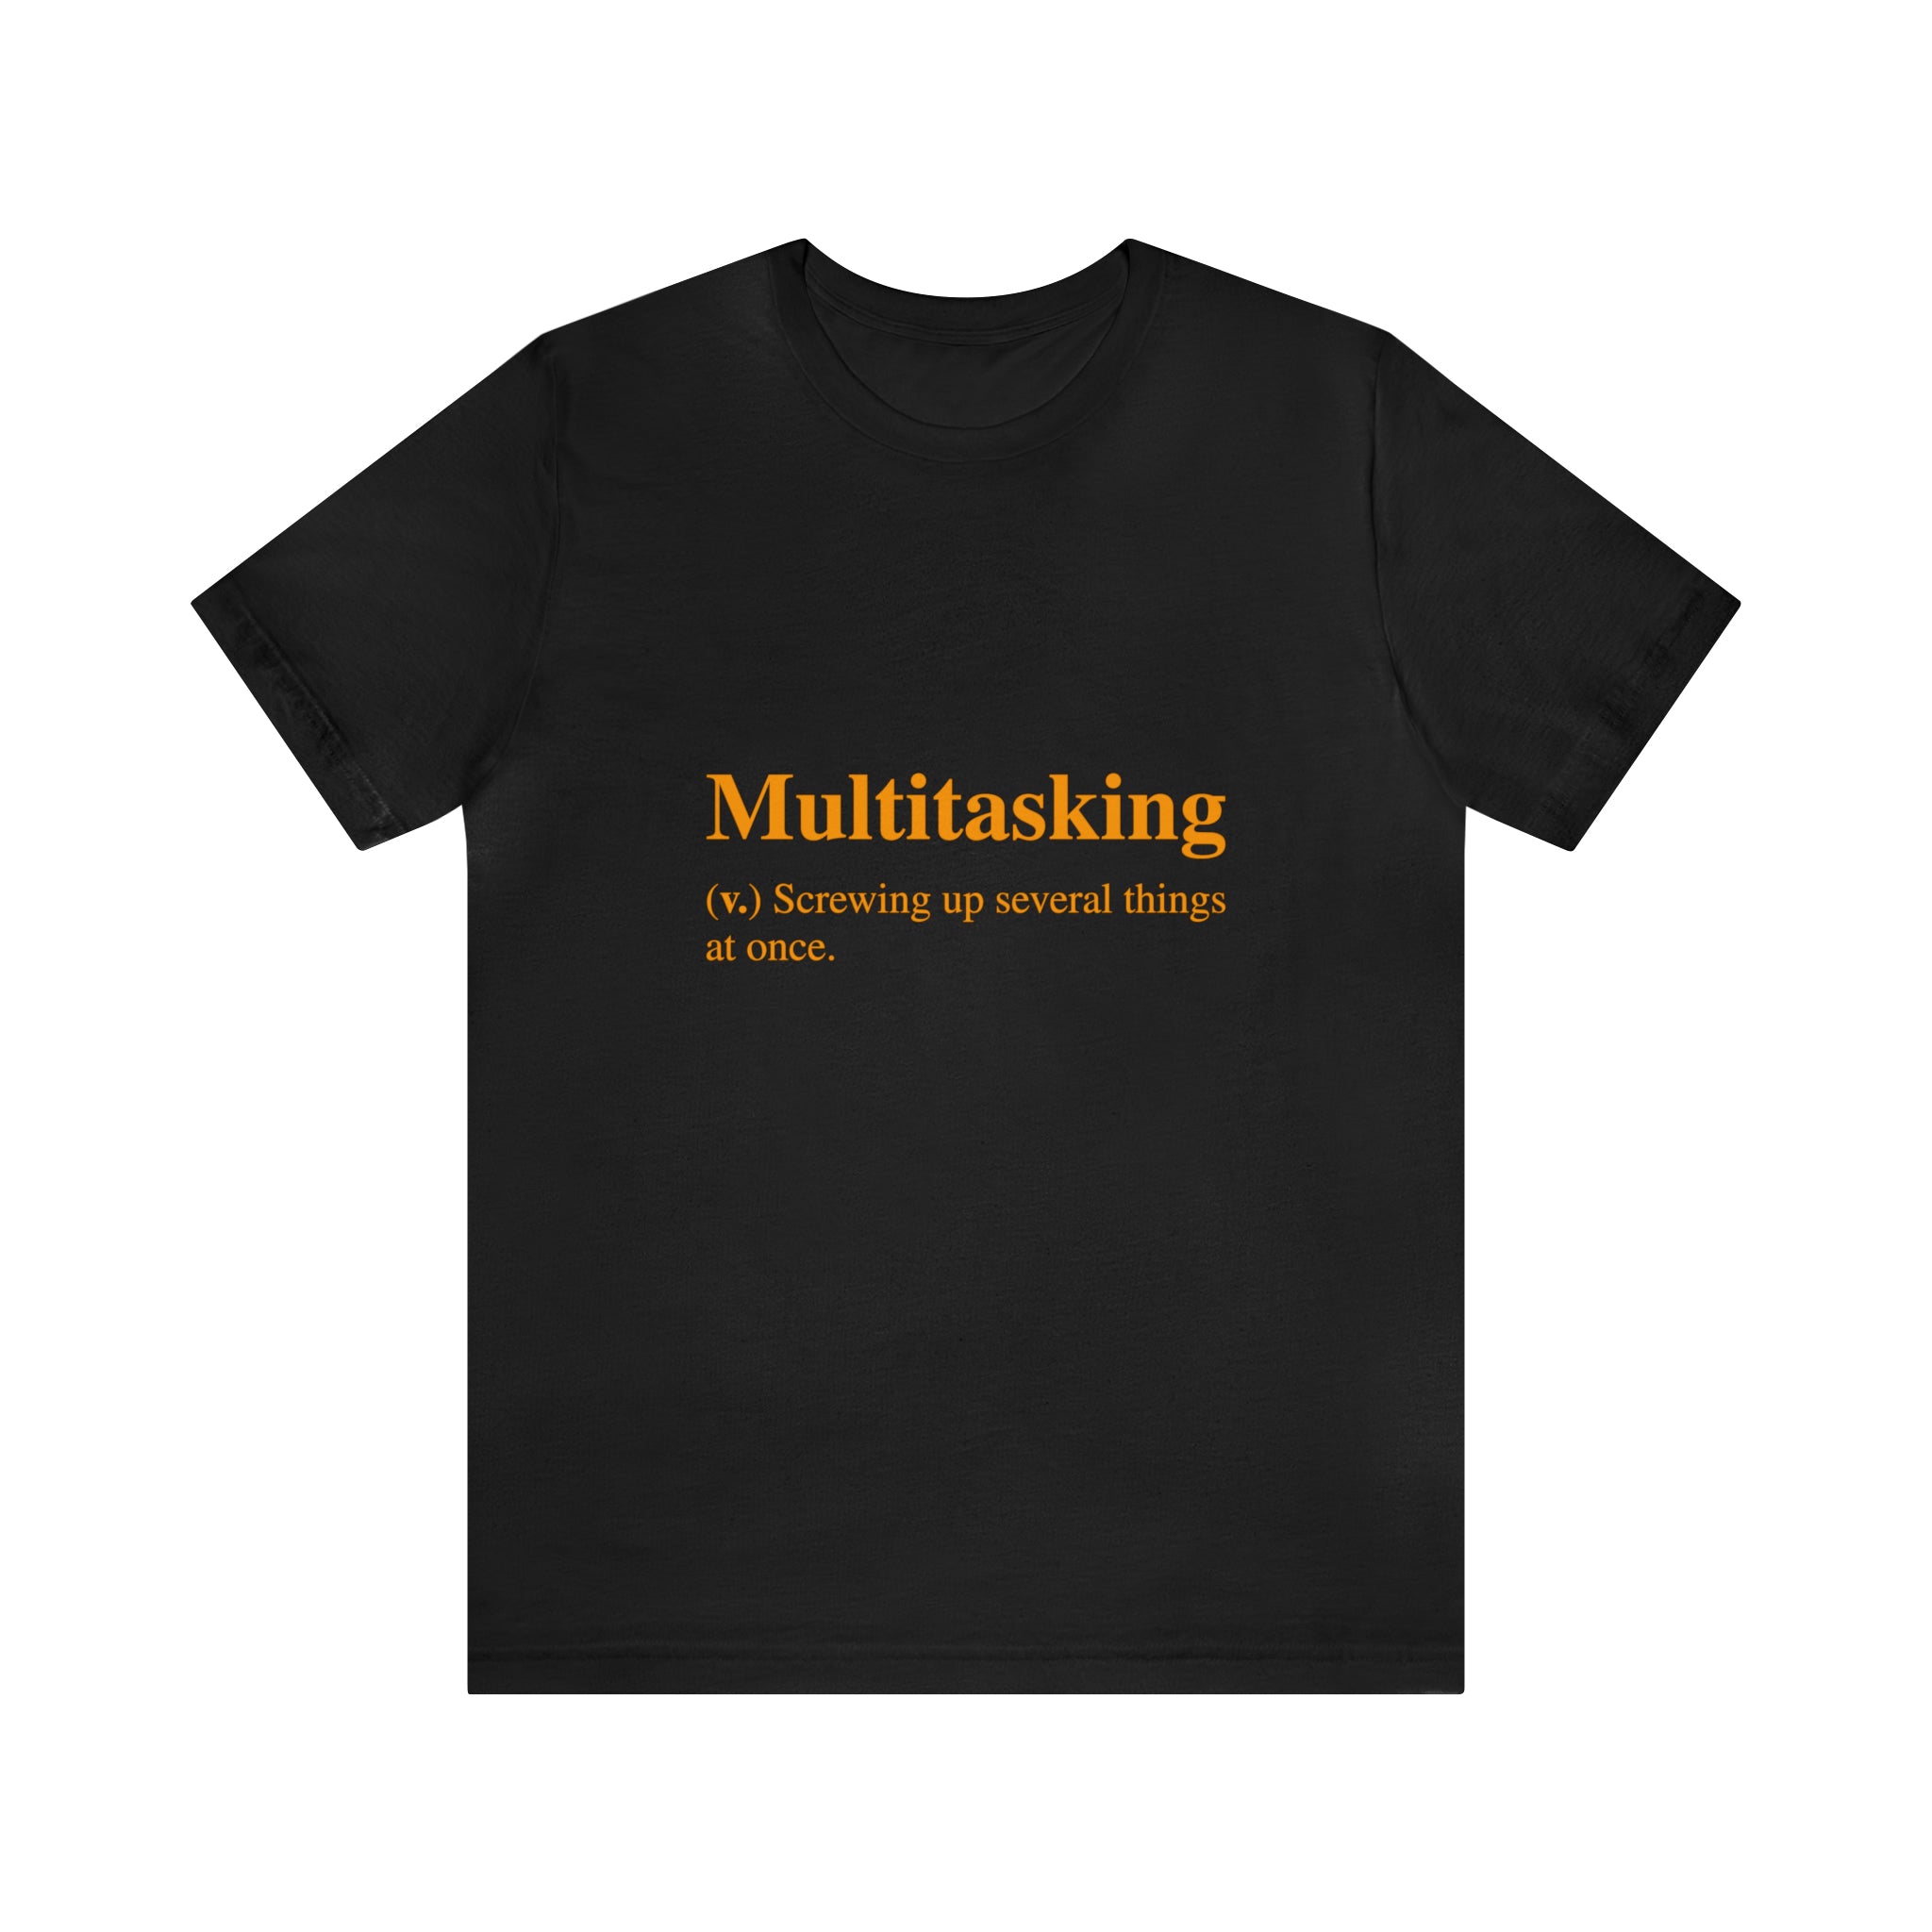 A trendy Multitasking T-Shirt in black with the word "multitasking" boldly displayed, perfect for fashion-forward individuals.